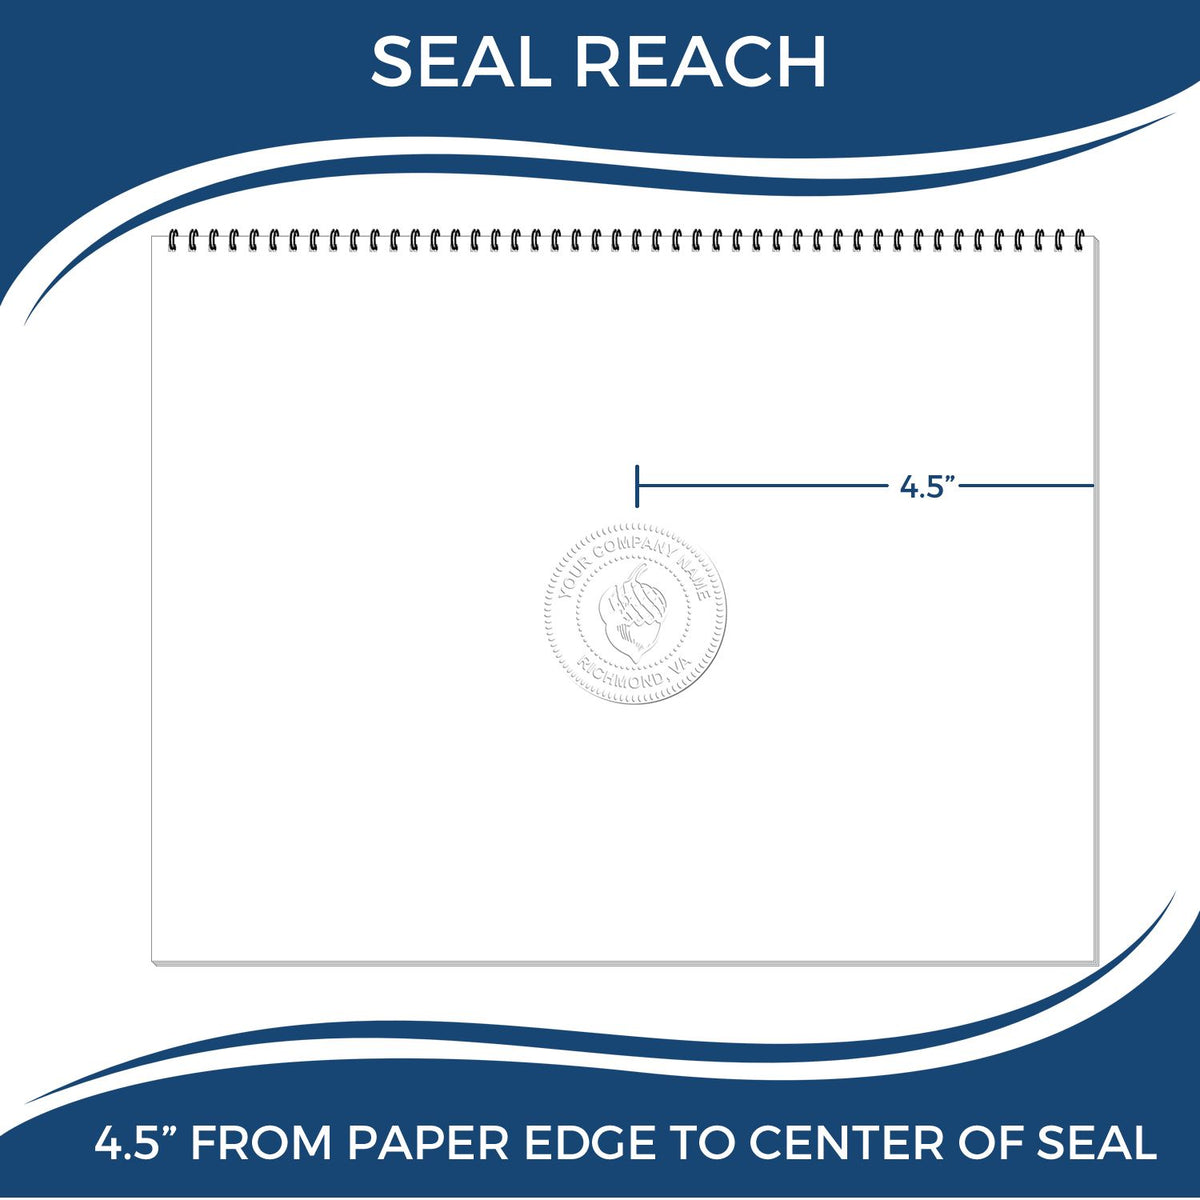 An infographic showing the seal reach which is represented by a ruler and a miniature seal image of the State of Alabama Extended Long Reach Engineer Seal